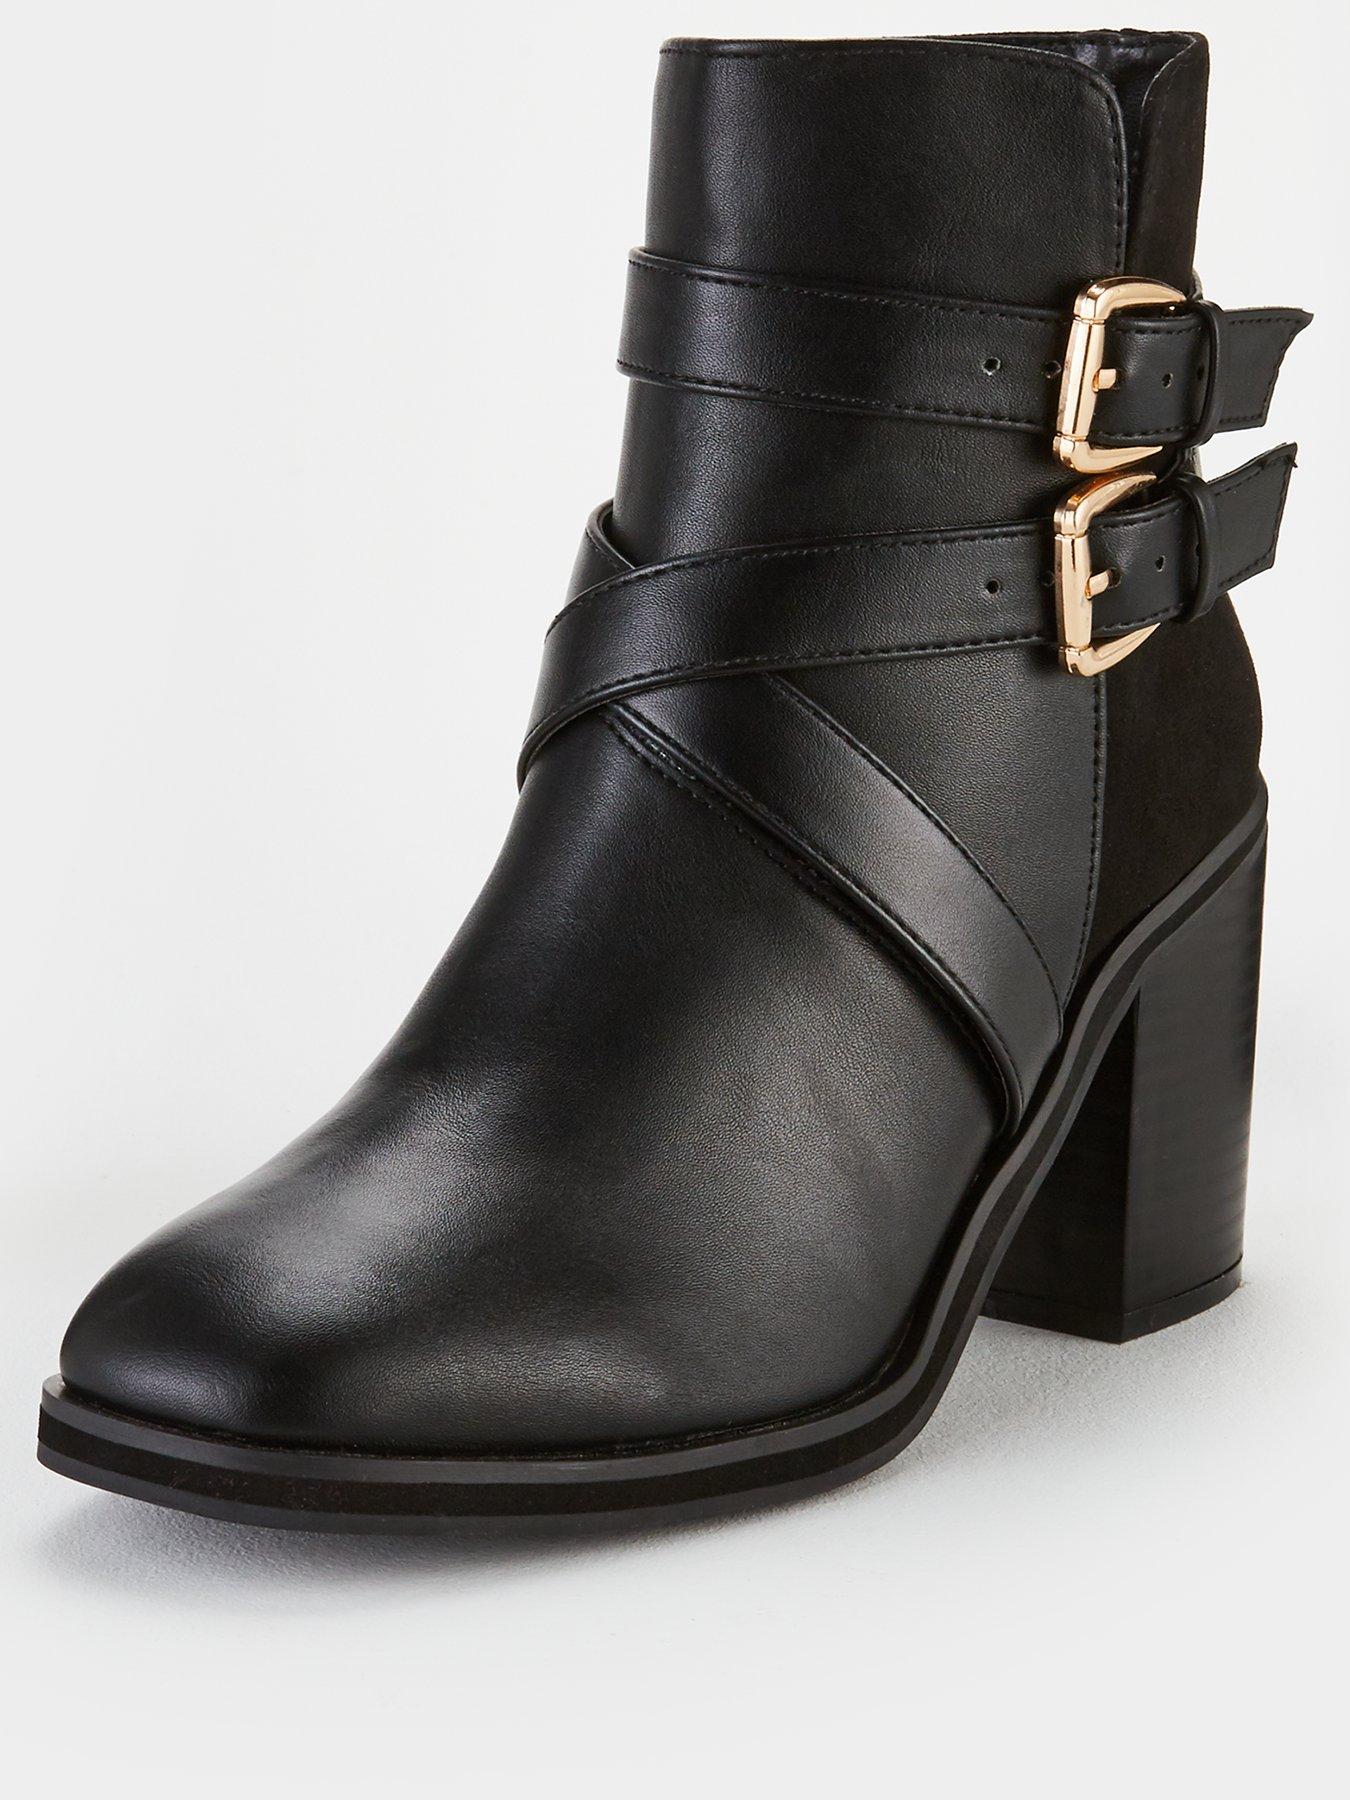 Wide Fitting Shoes \u0026 Boots | Shop 